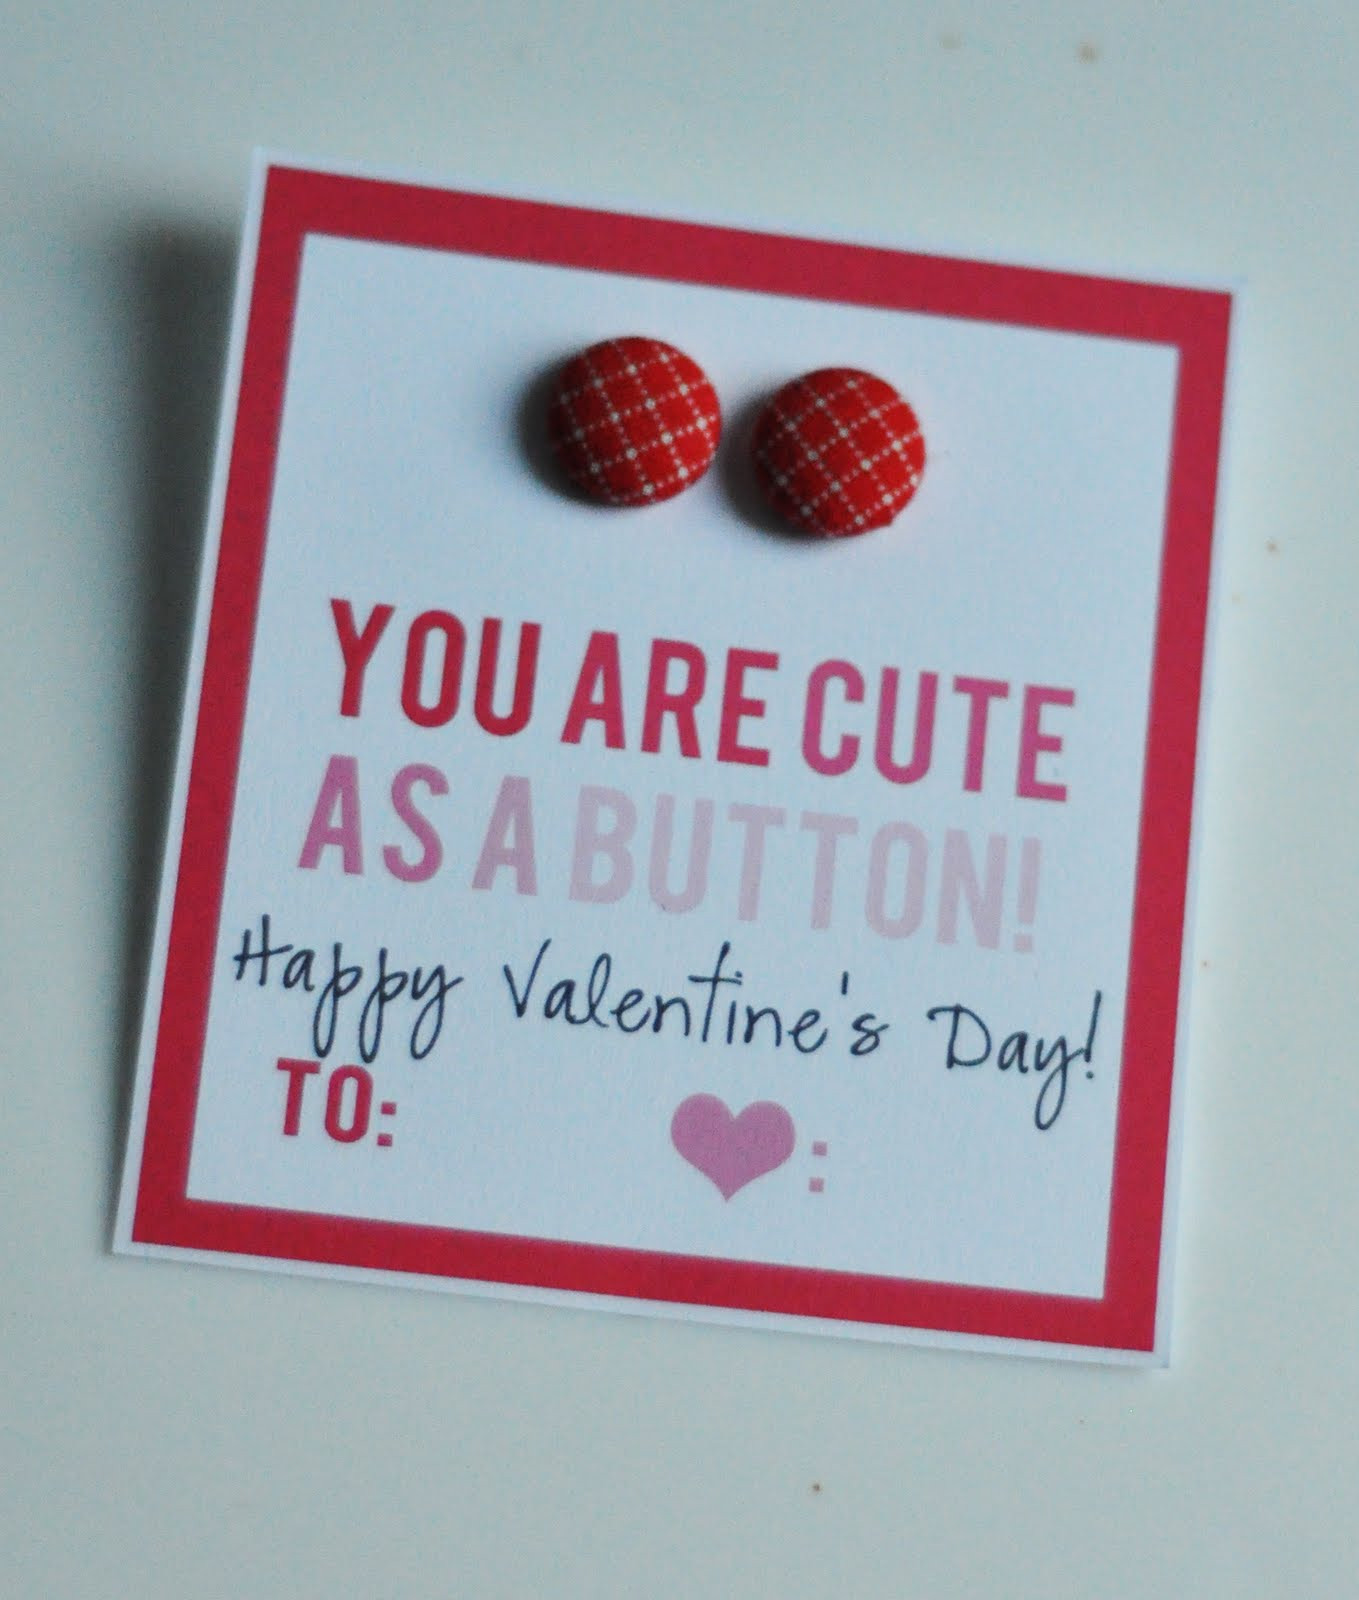 Cute Valentines Day Card Ideas
 Valentines Day Gift Ideas